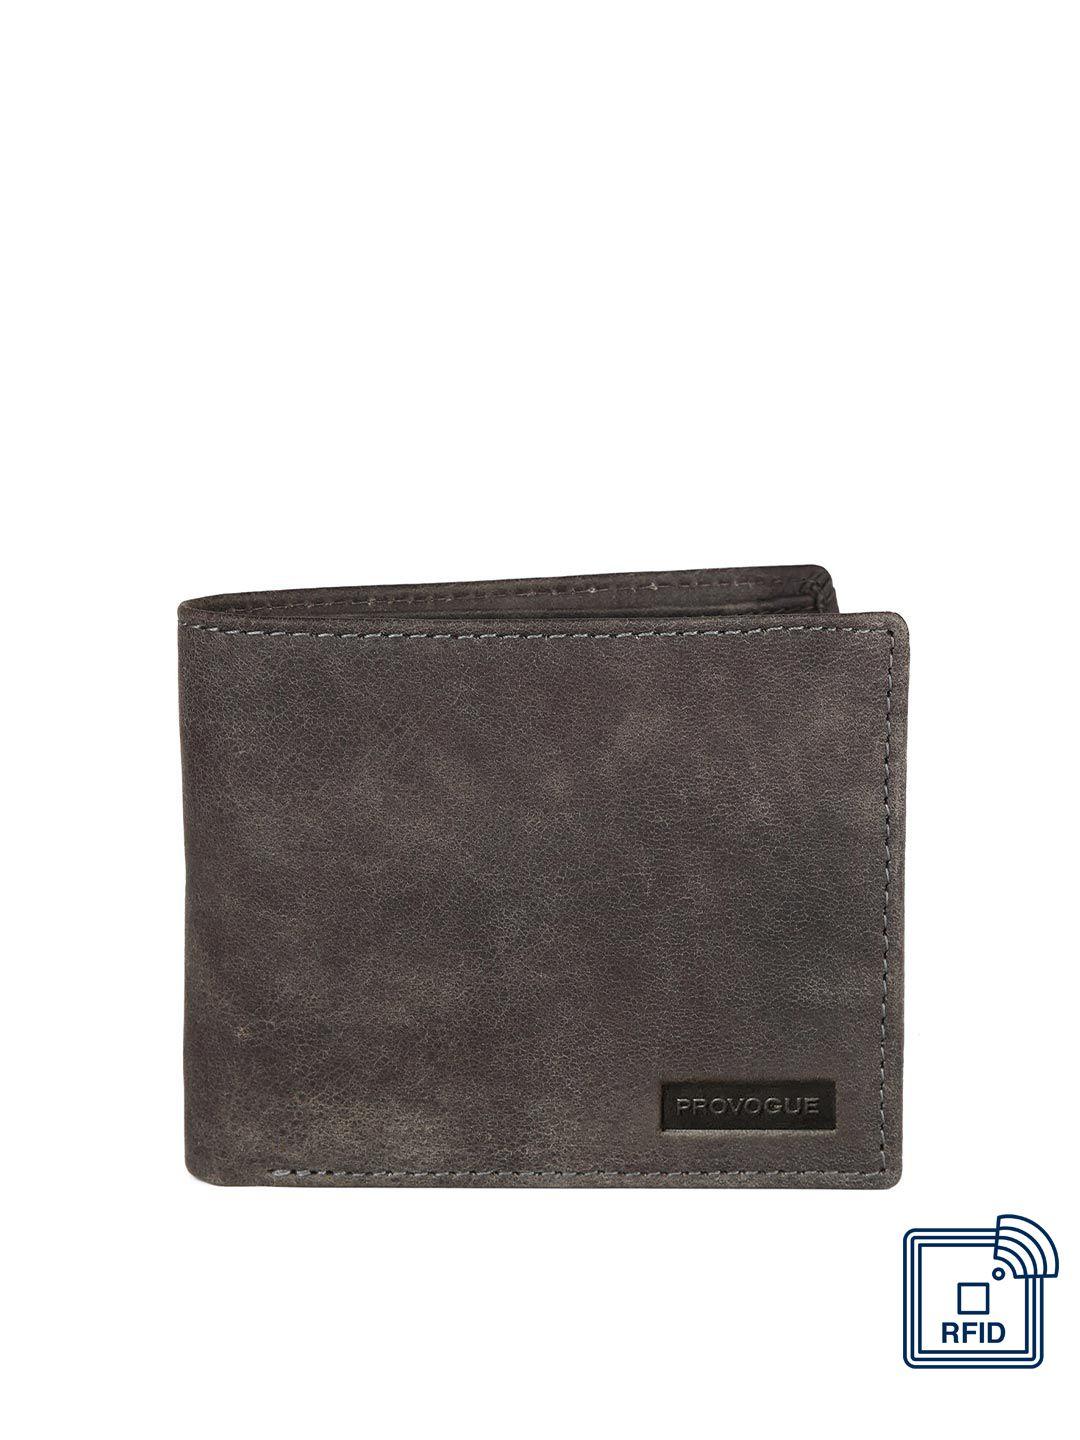 provogue men grey & black textured leather two fold wallet